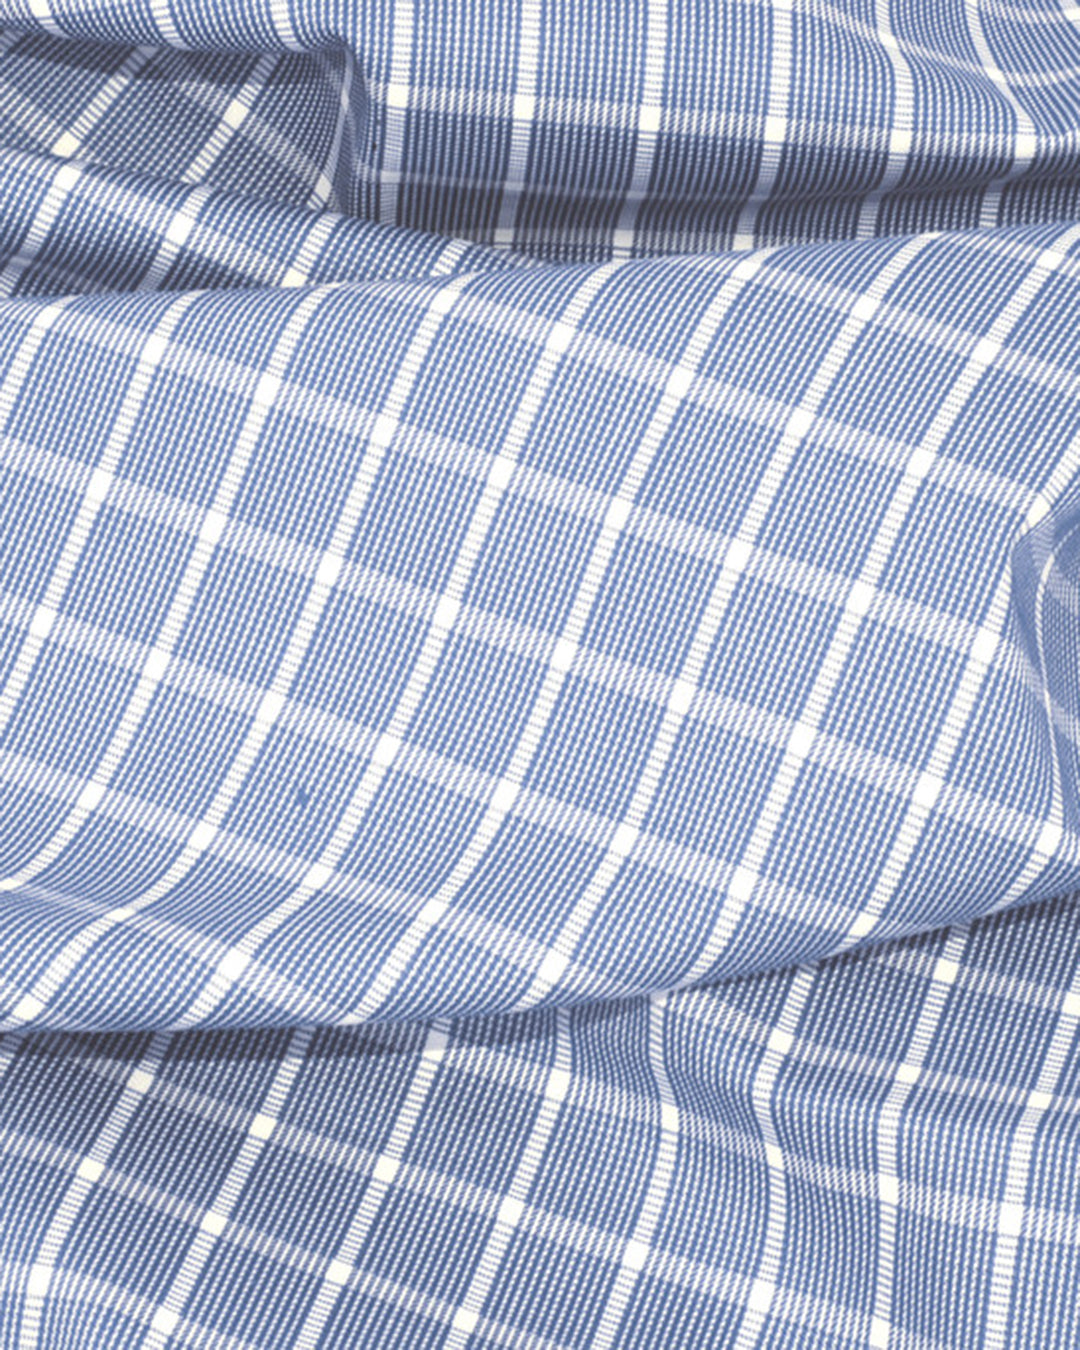 Closeup view of custom check shirts for men by Luxire in navy blue white grid